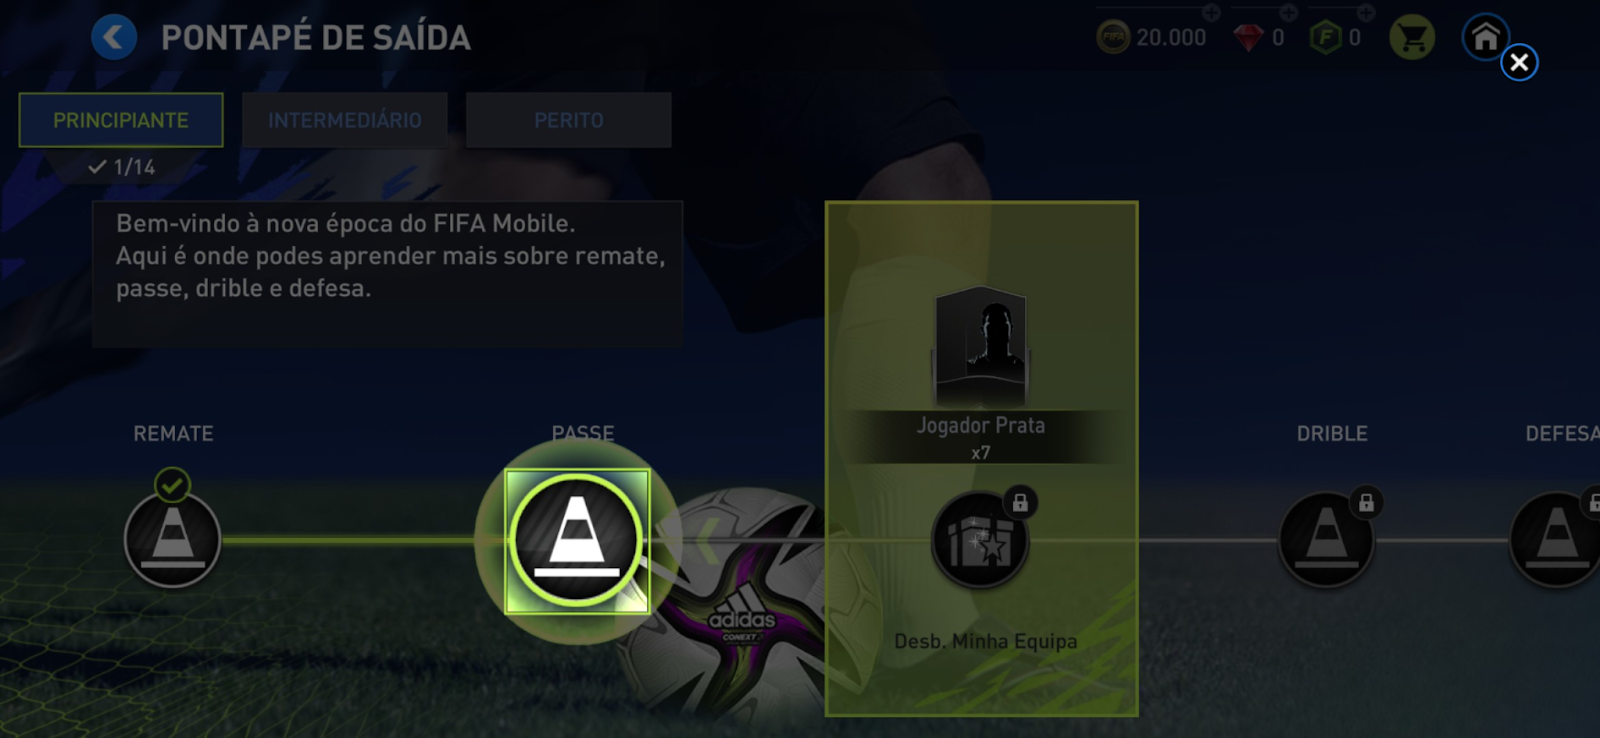 Analysing the UX Design of the FIFA Mobile App